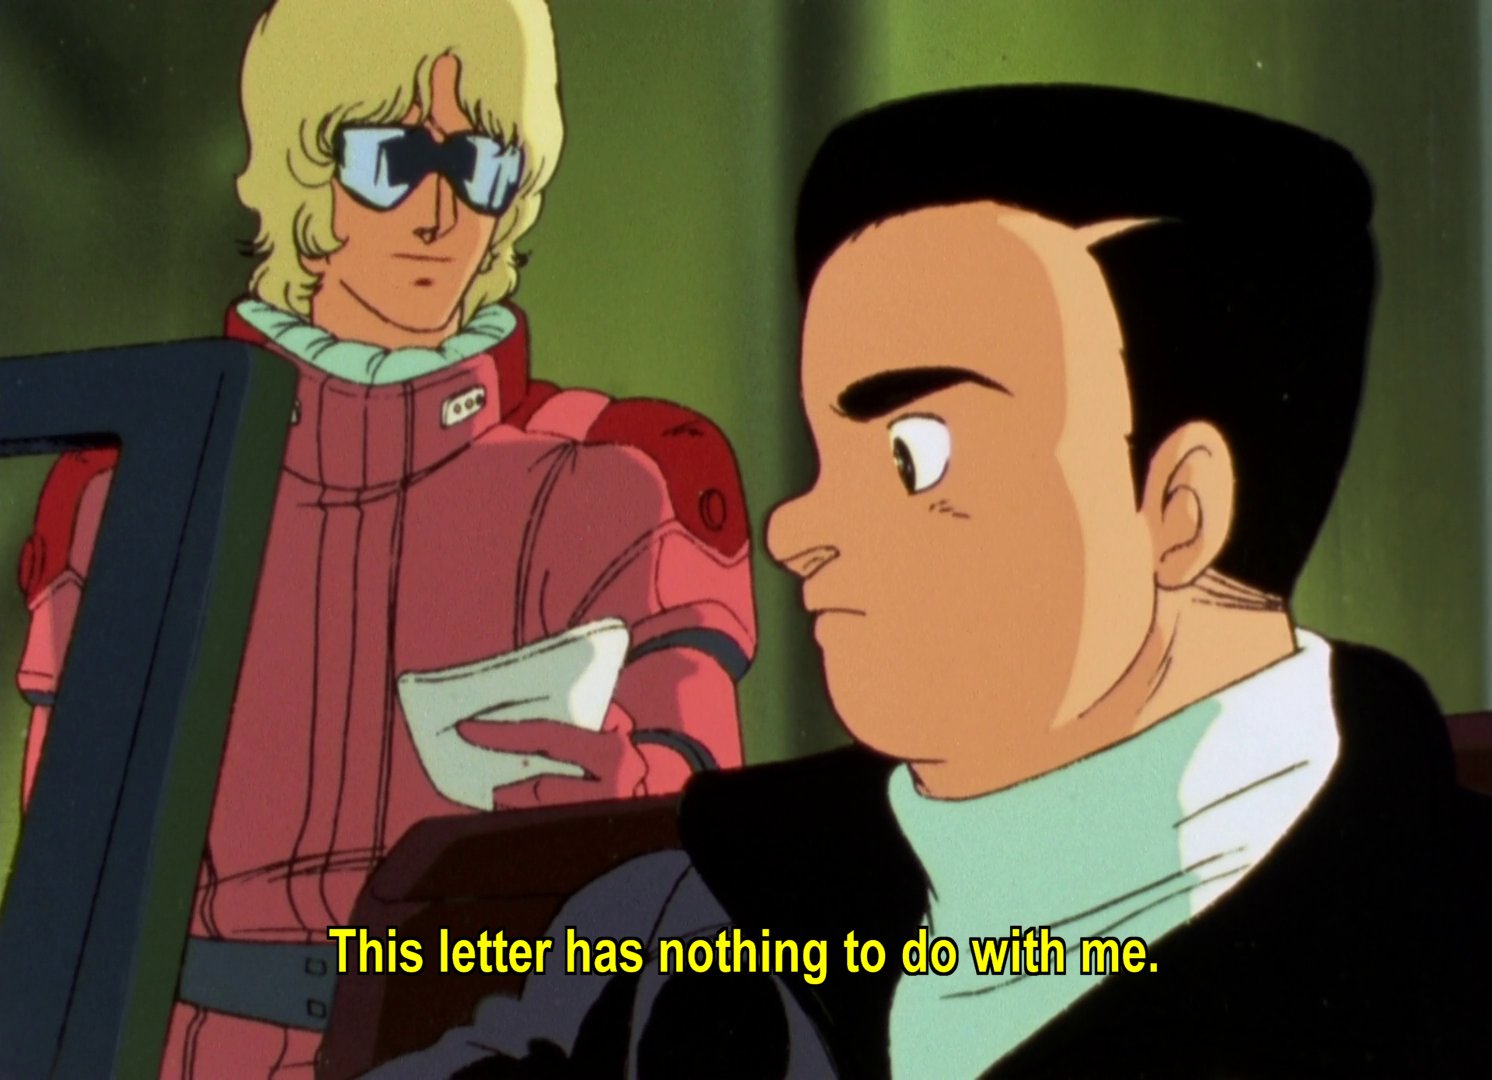 Lt Quattro, talking to Kobayashi, who's in his car: This letter has nothing to do with me.